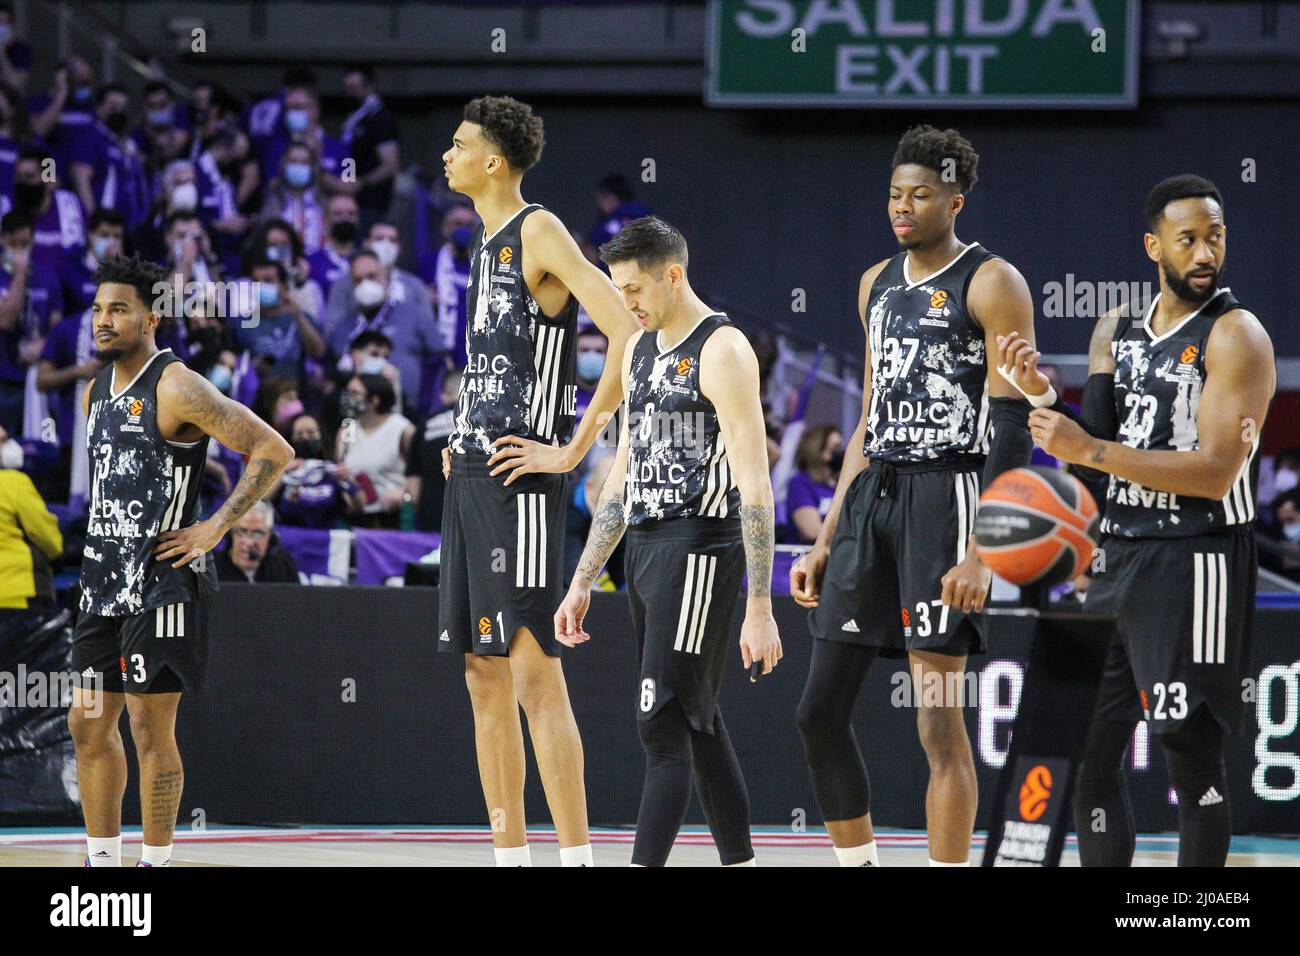 Madrid, Spain. 17th Mar, 2022. Chris Jones, Victor Wembanyama, Paul Lacombe, Kostas Ndubuisi Antetokounmpo and David Lighty of Asvel Lyon-Villeurbanne during the Turkish Airlines Euroleague basketball match between Real Madrid and Asvel Lyon-Villeurbanne on march 17, 2022 at Wizink Center in Madrid, Spain Credit: Independent Photo Agency/Alamy Live Newss Stock Photo